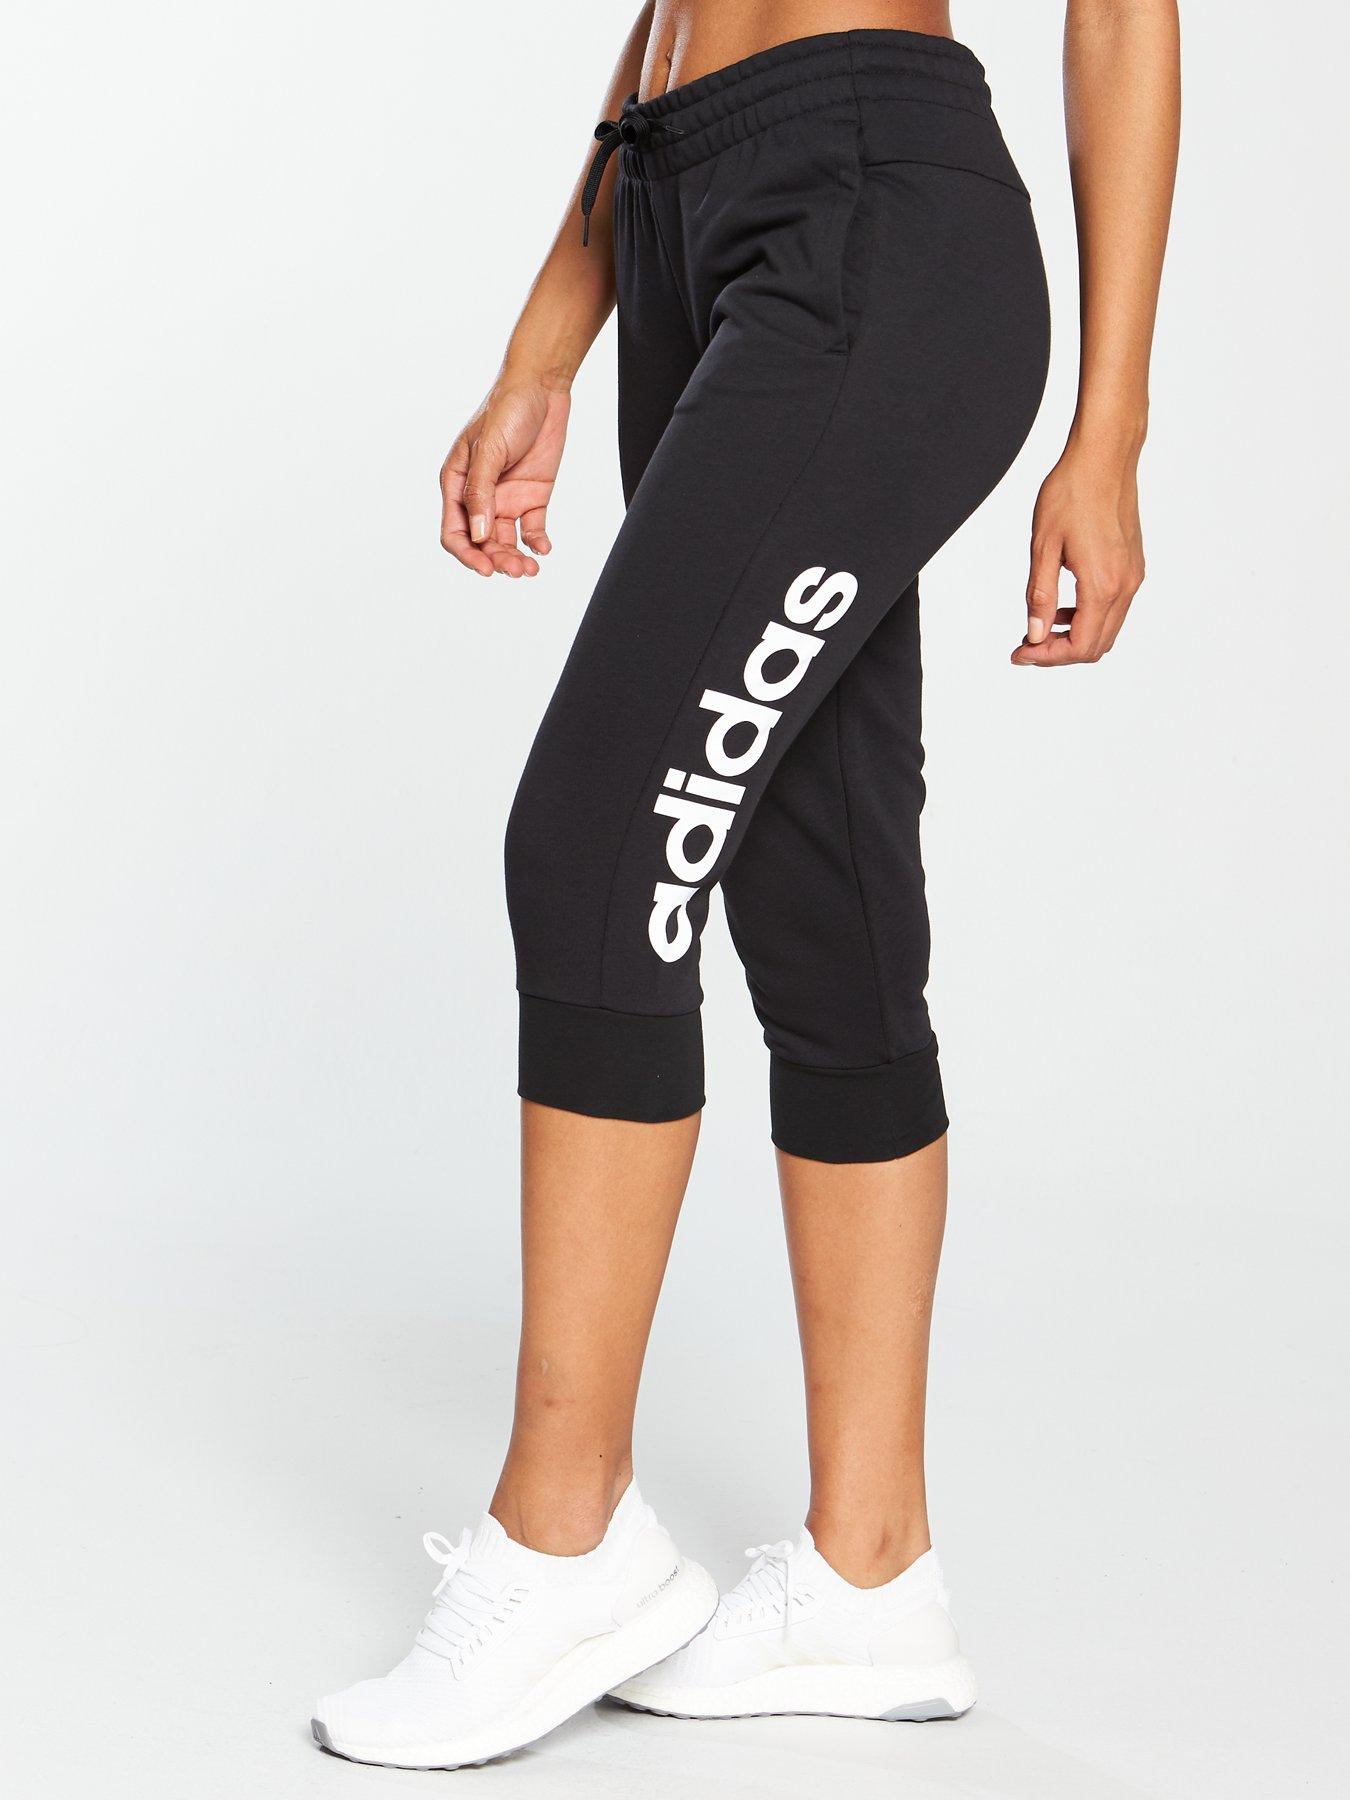 adidas joggers for women